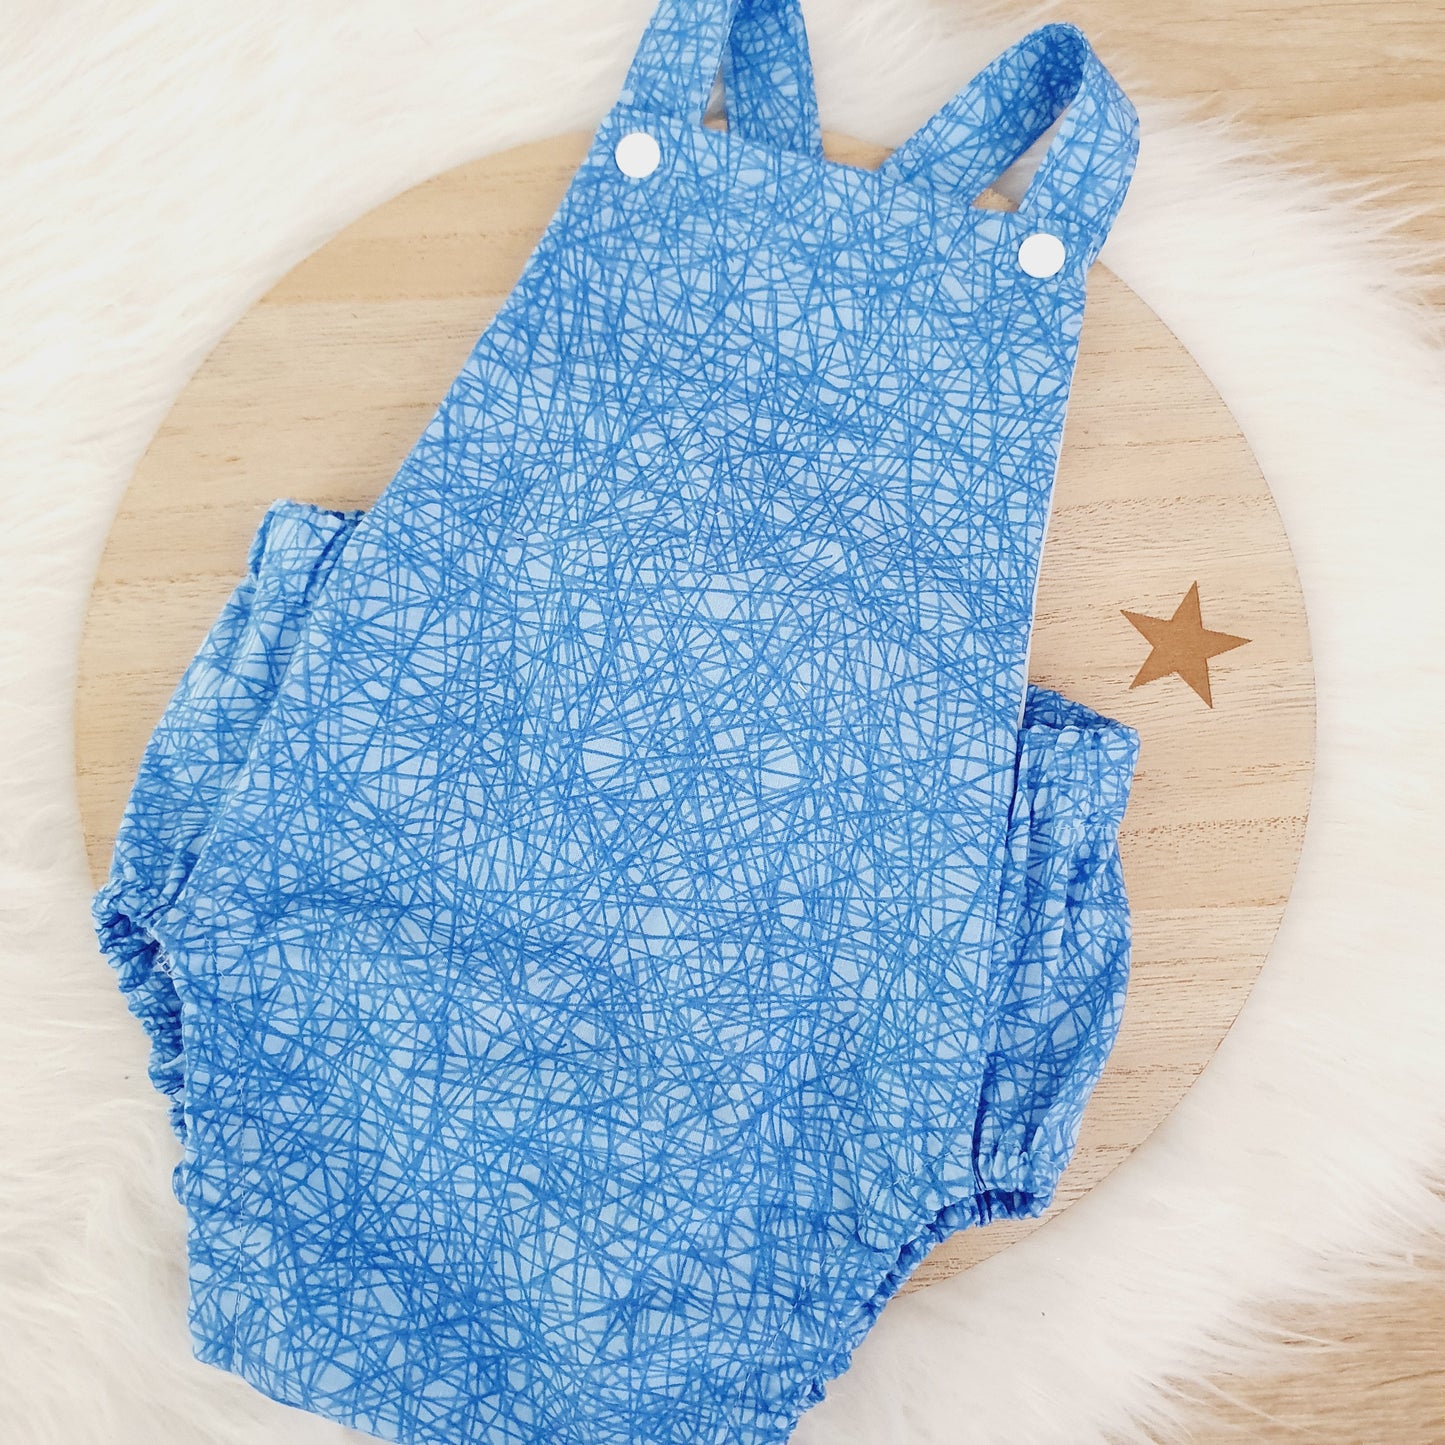 TANGLED BONNIE BLUE Baby Romper, Handmade Baby Clothing, Size 0 - 1st Birthday Clothing / Cake Smash Outfit, 9 - 12 months